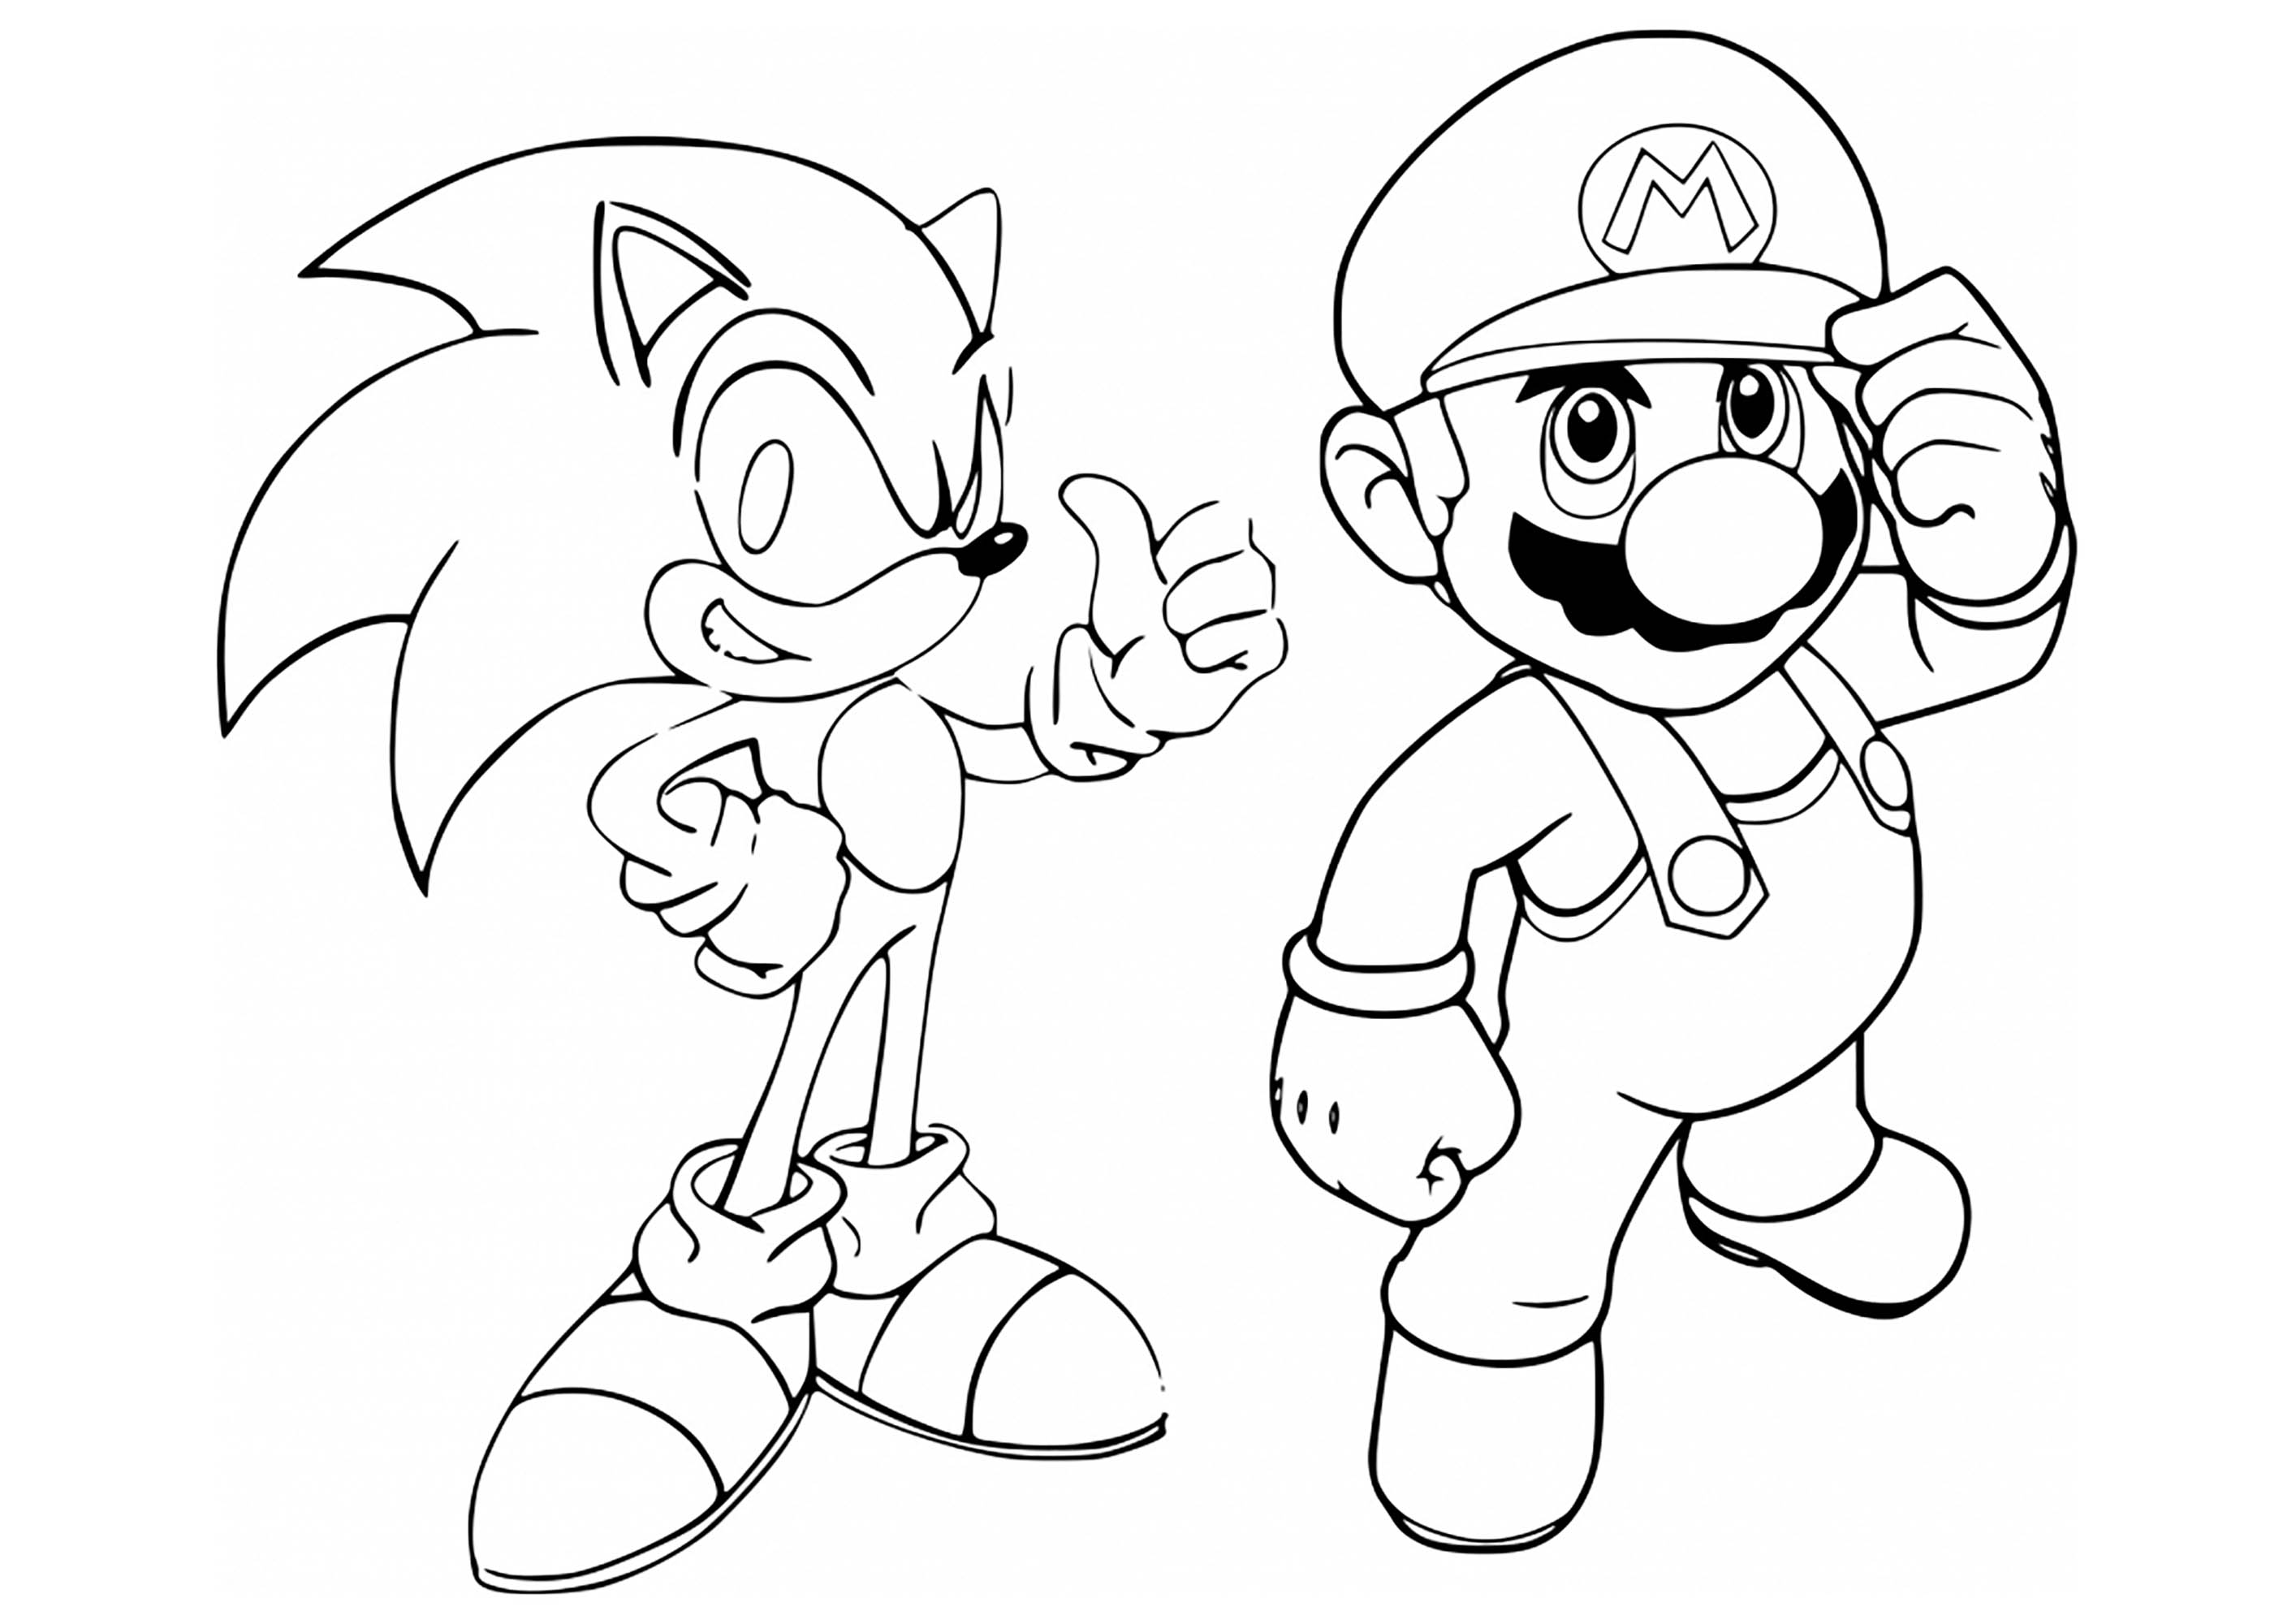 Sonic and Mario at the Olympic Tokyo games console Coloring Pages